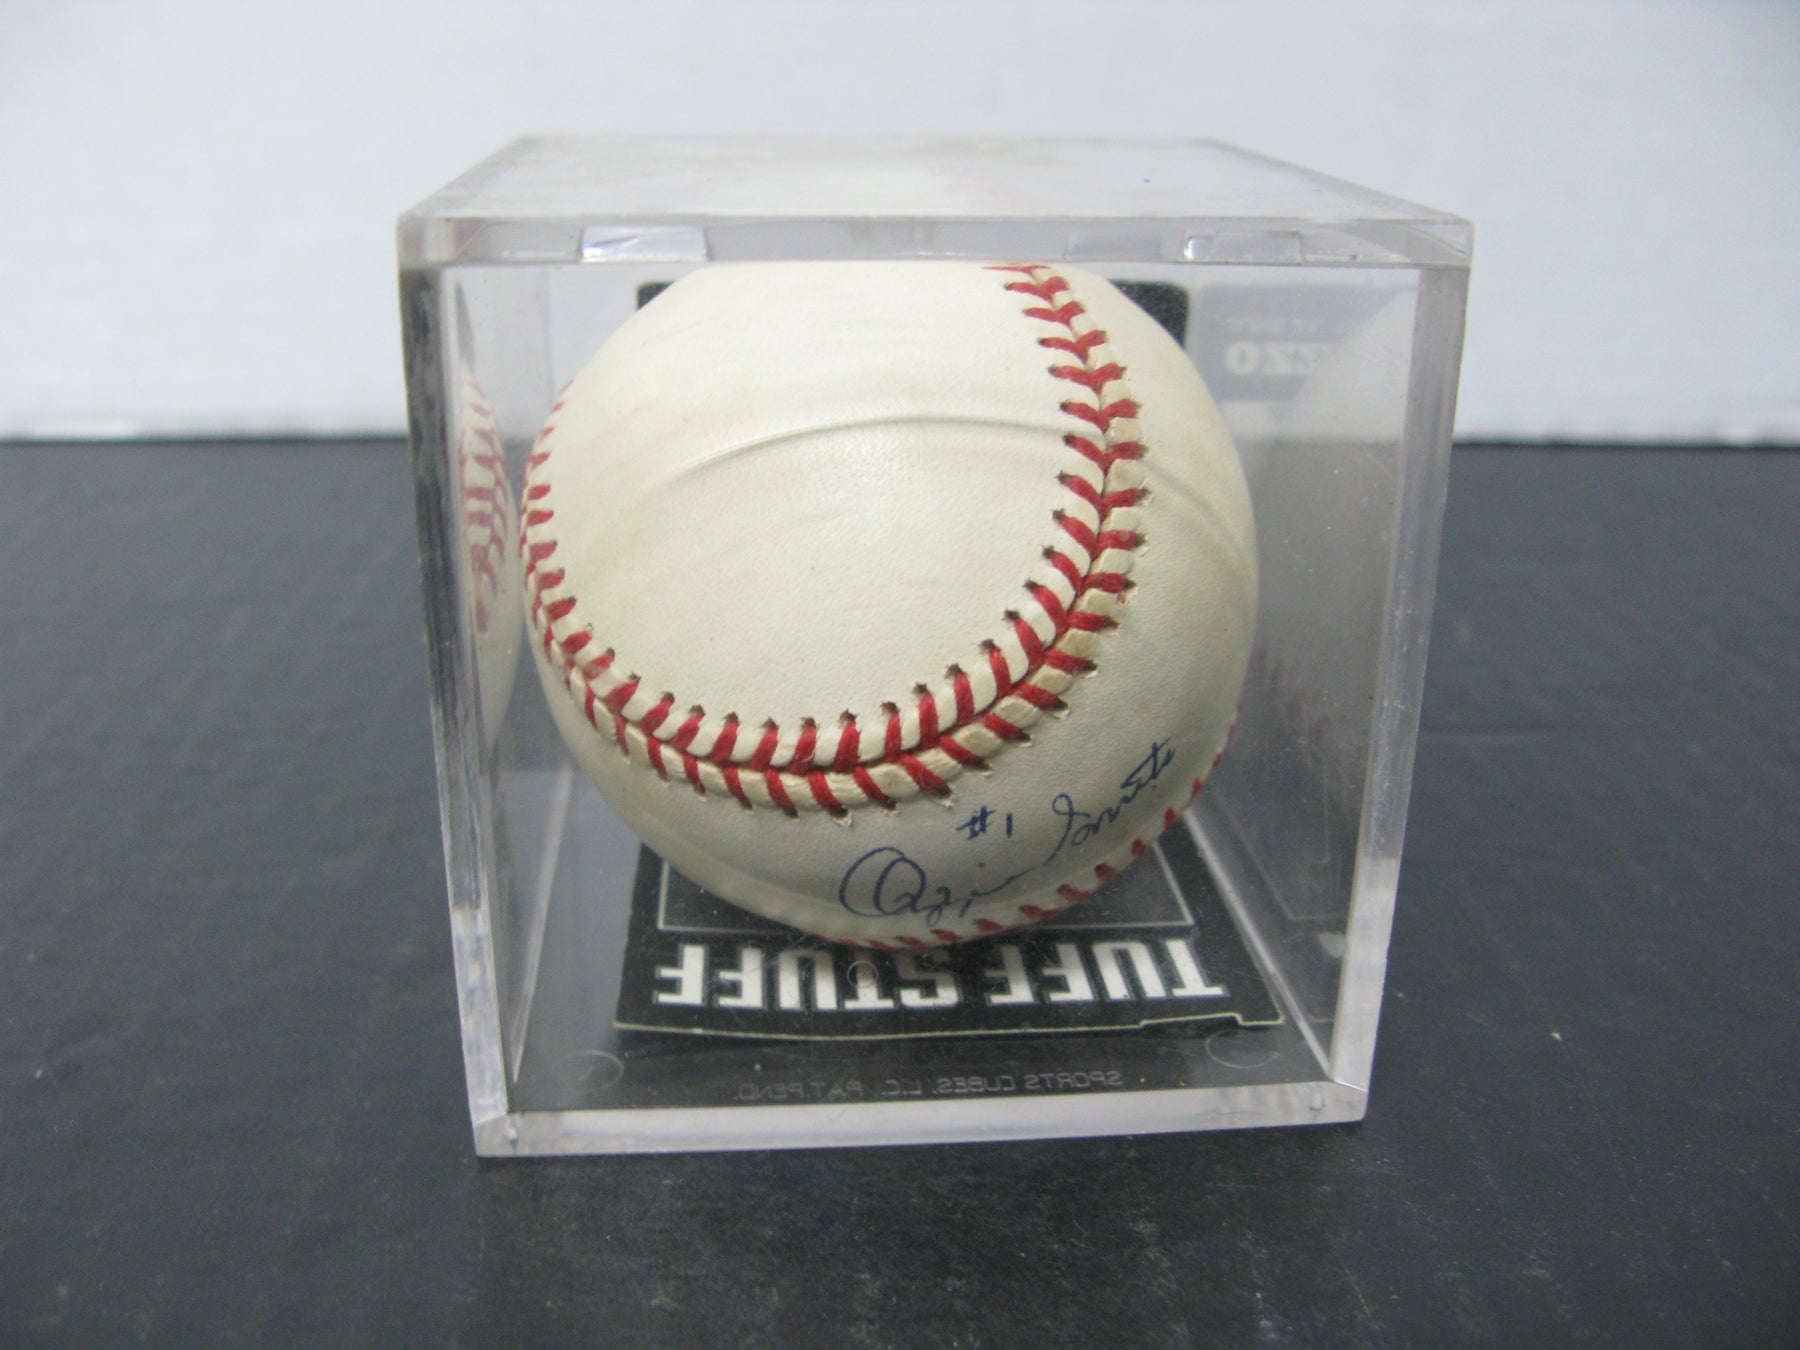 Autographed Baseball by Ozzie Smith